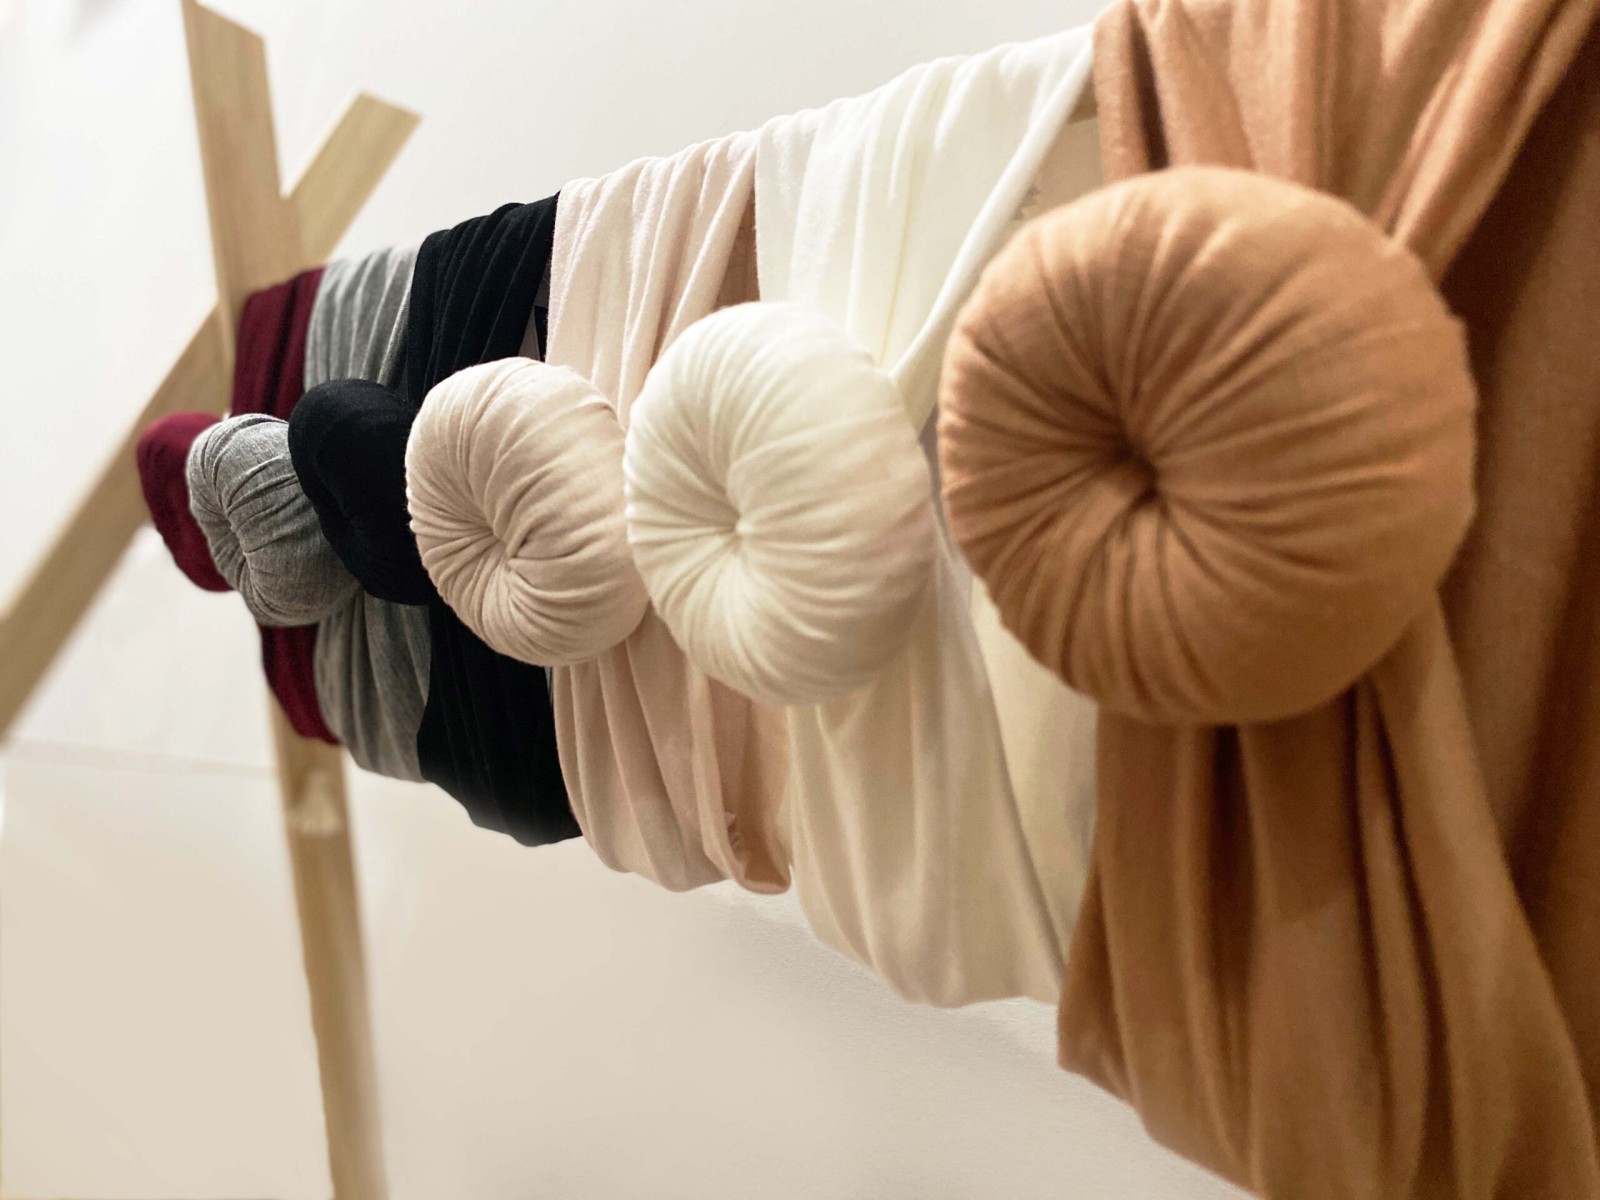 A collection of Tiny Knot Co headbands displayed on a clothesline.